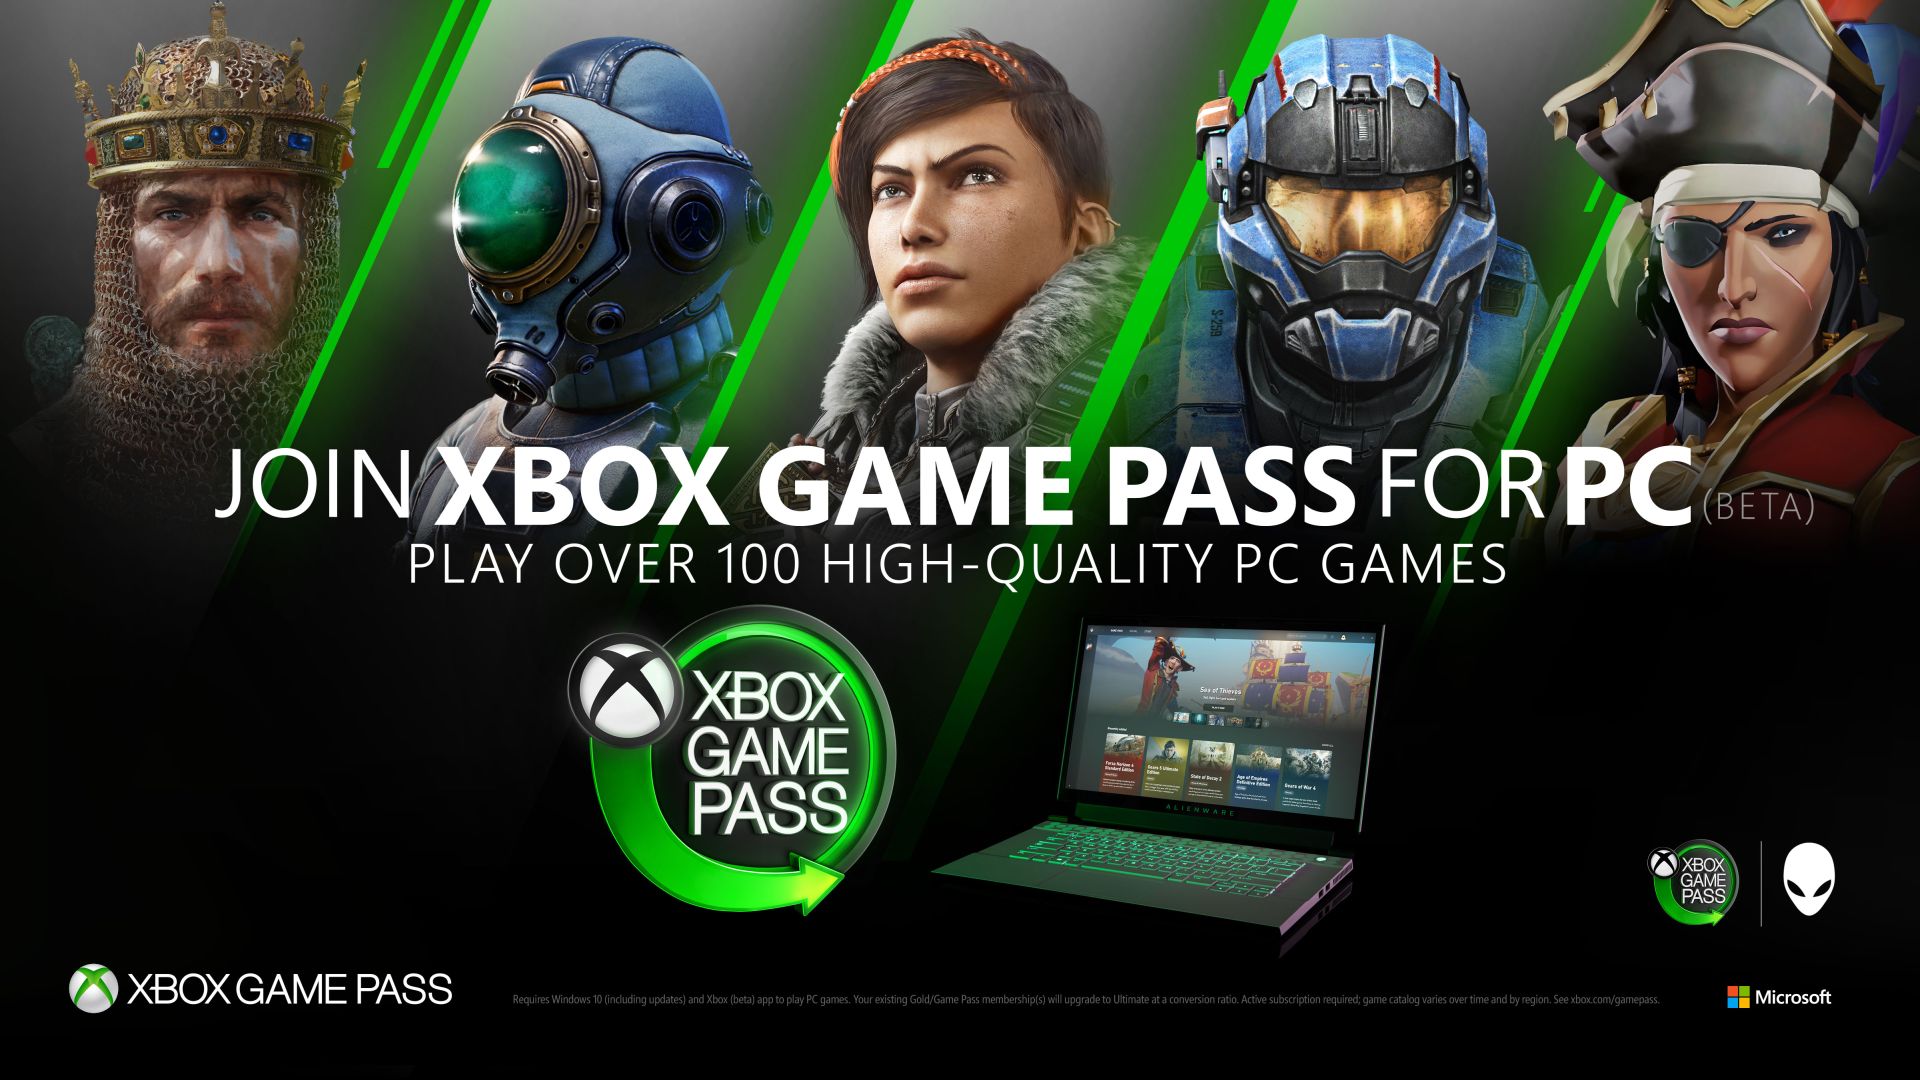 Xbox Game Pass for PC/Dell Promo